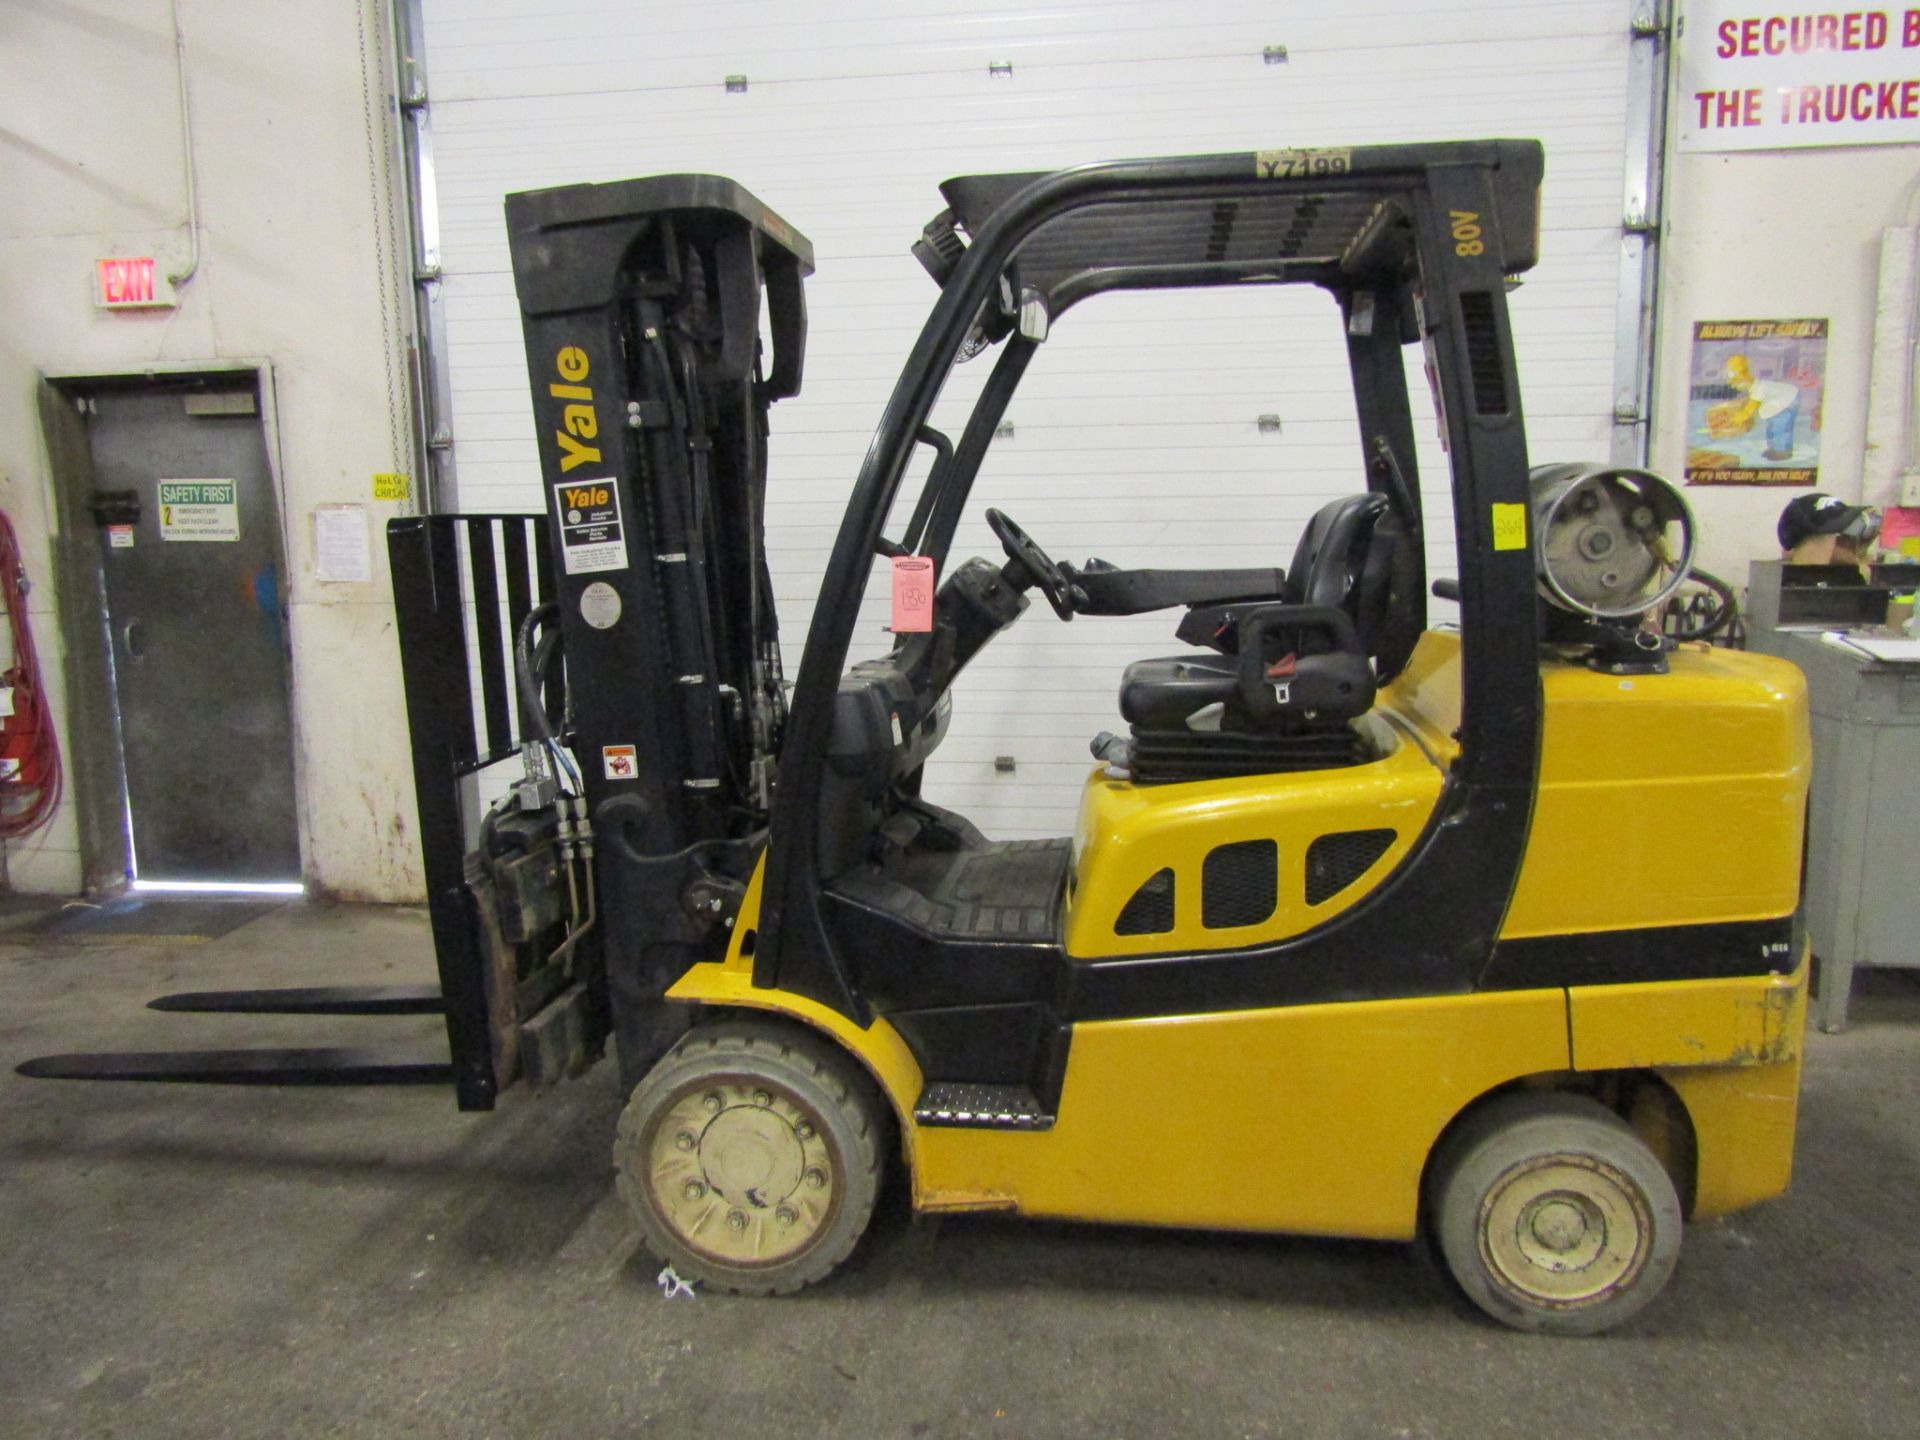 2014 Yale 8000lbs Capacity Forklift with 3-stage mast - LPG (propane) with sideshift & fork